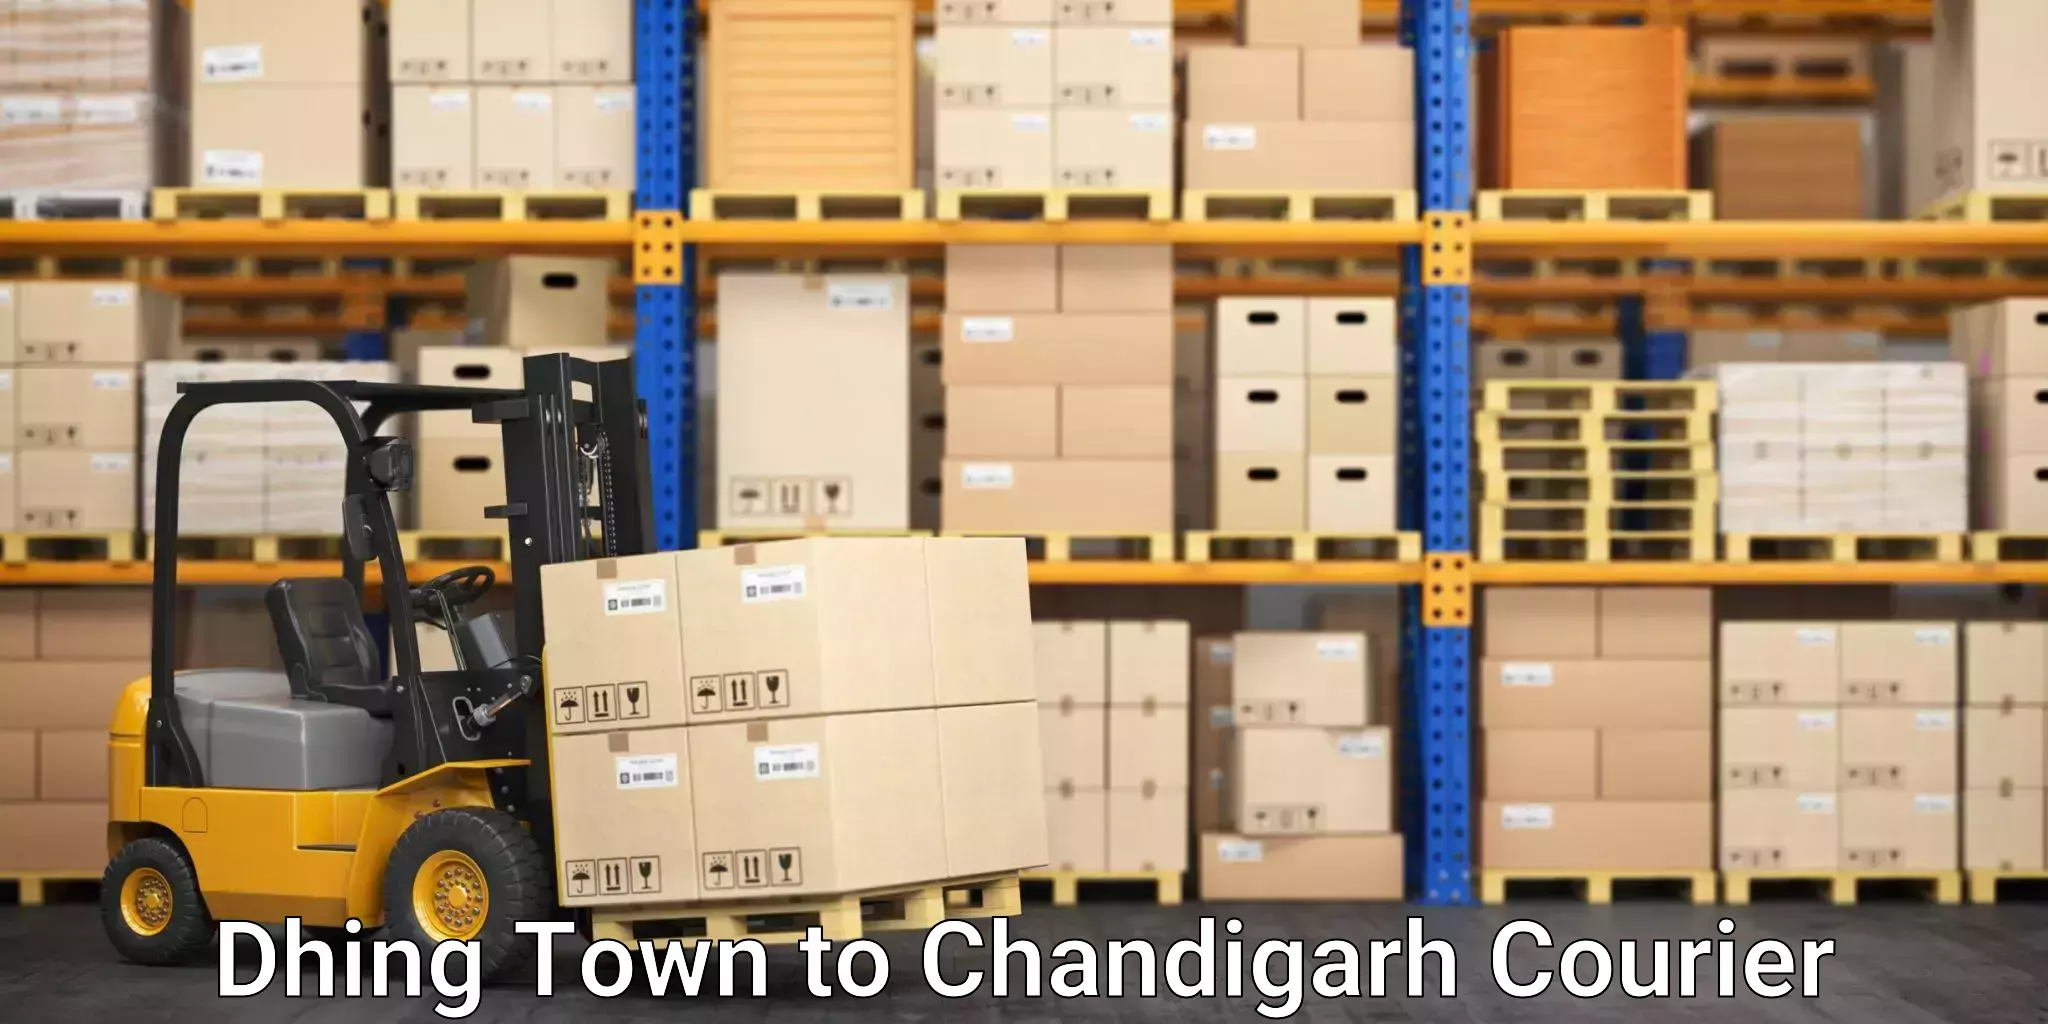 Speedy delivery service Dhing Town to Panjab University Chandigarh